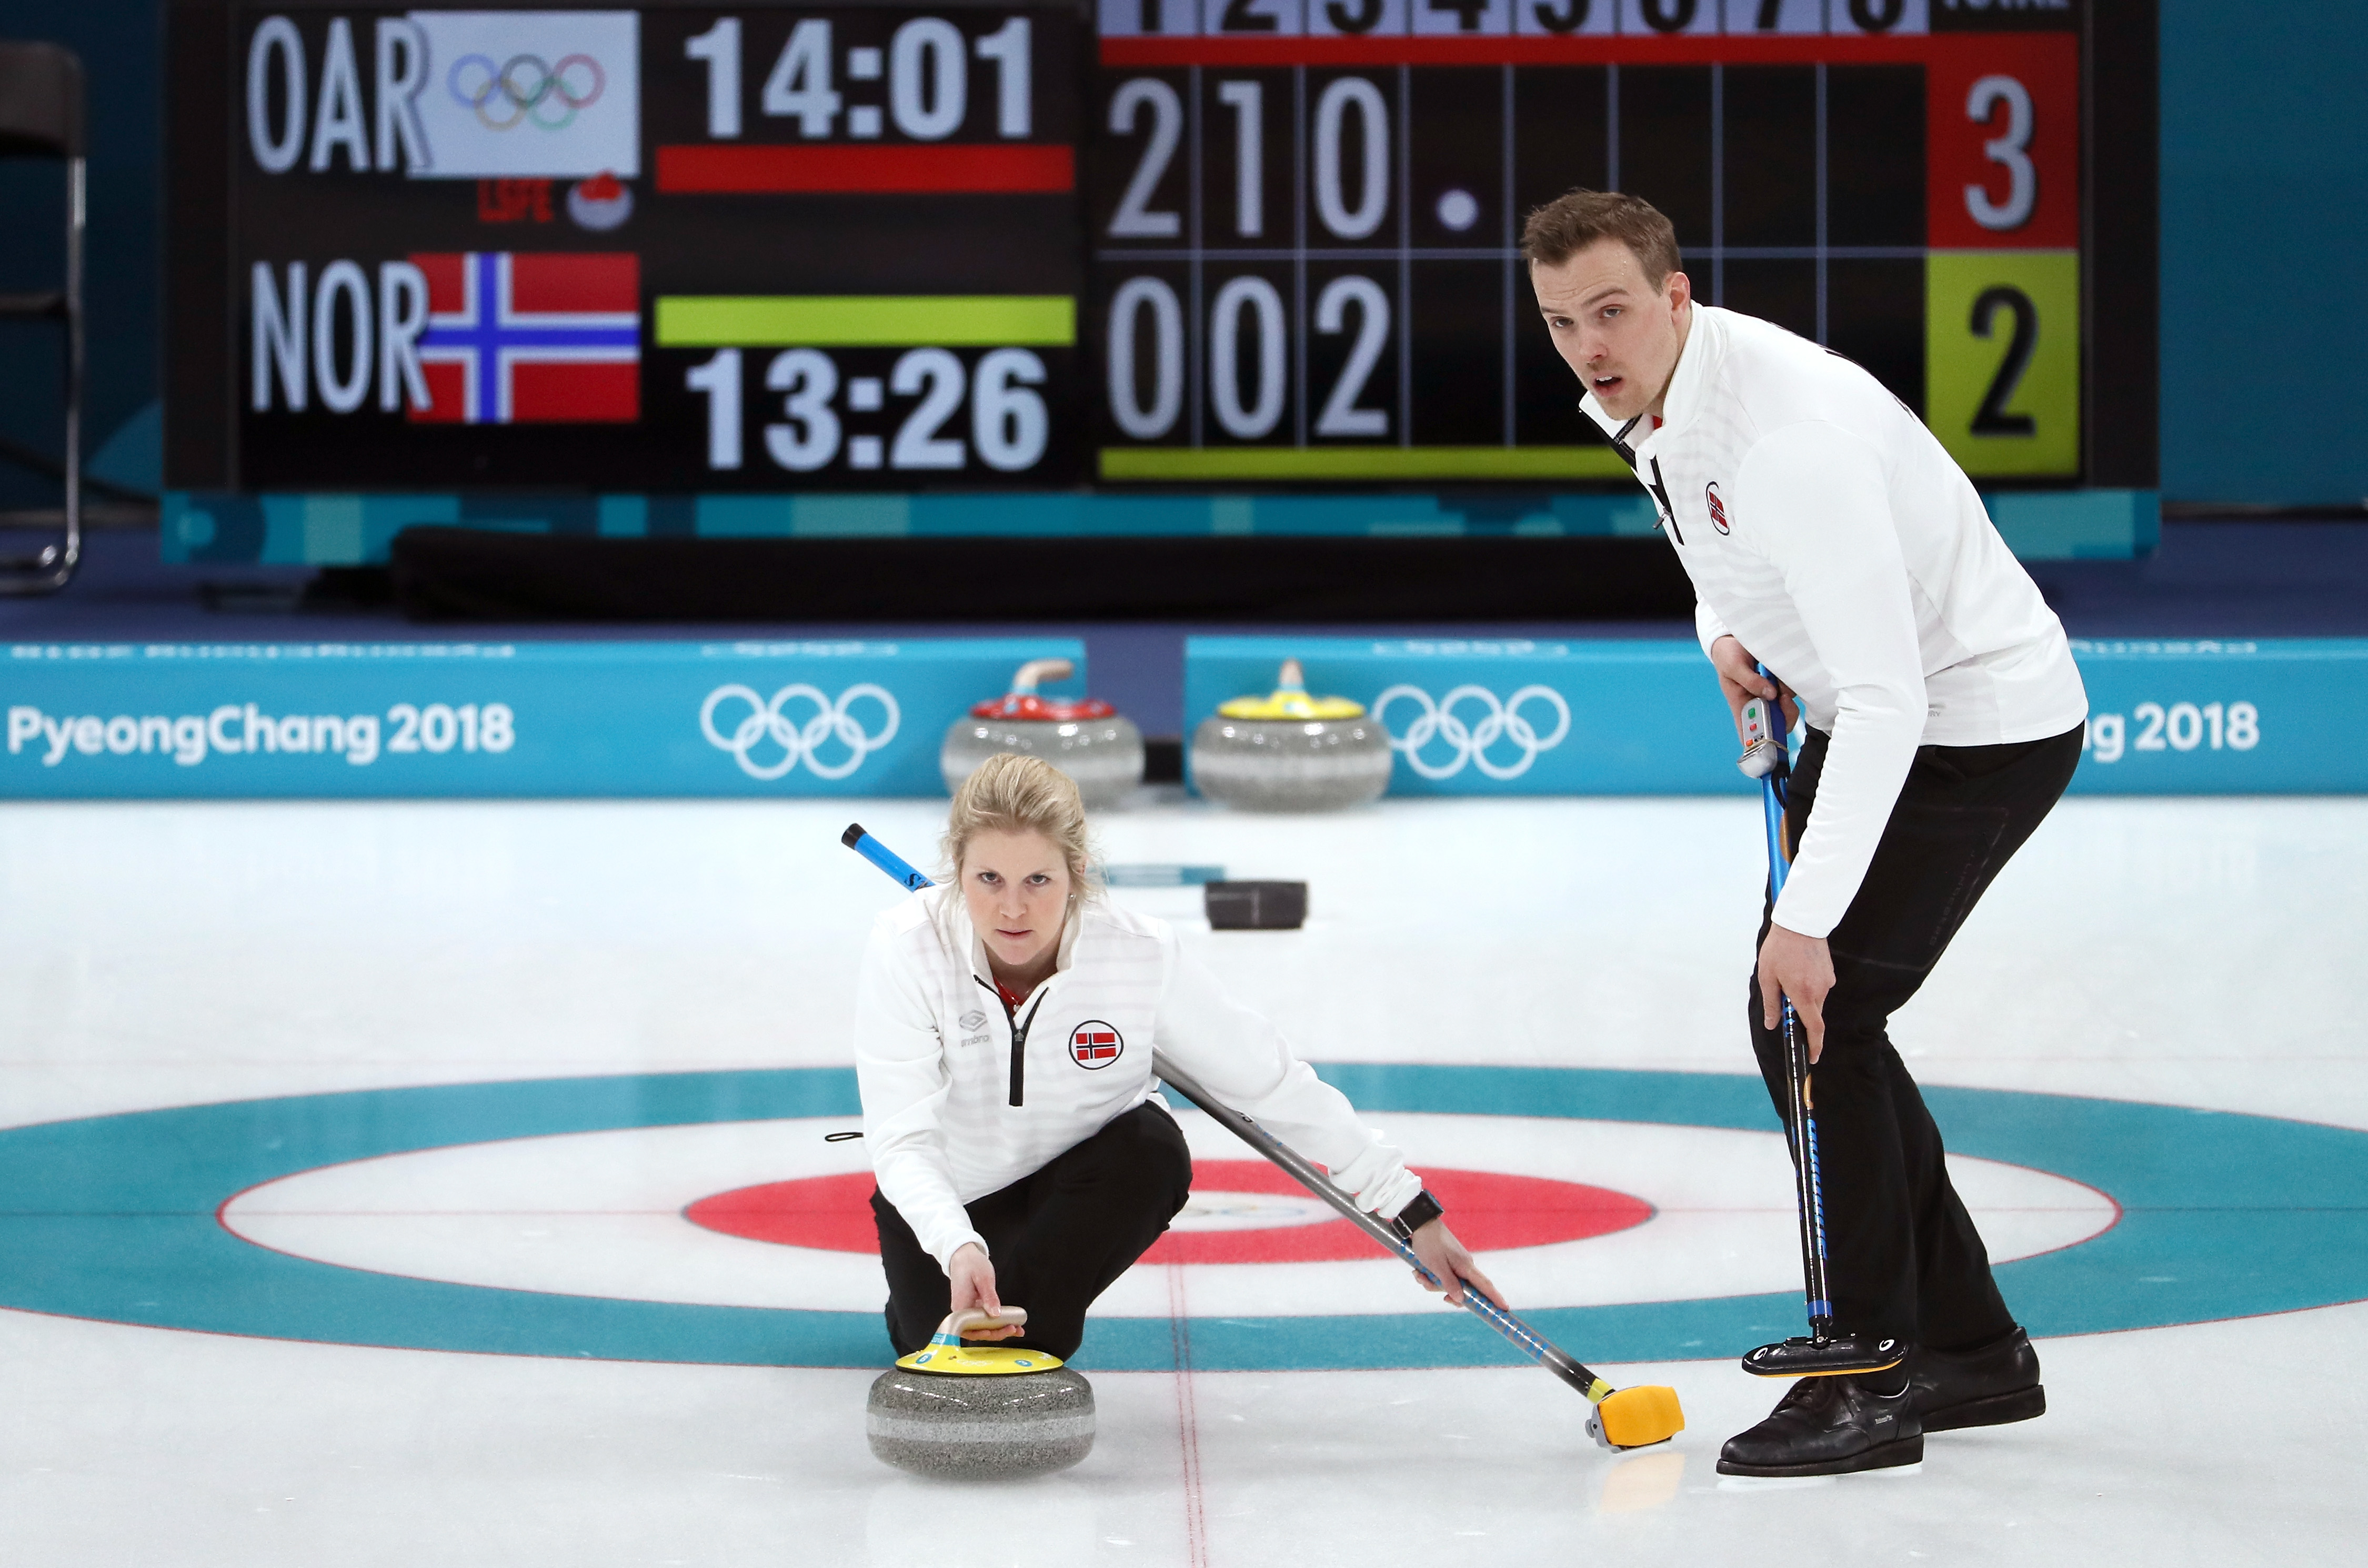 Kristin Skaslien and Magnus Nedregotten of Norway deliver a stone against Olympic Athletes from Russia during the Curling Mixed Doubles Bronze Medal Game on day four of the PyeongChang 2018 Winter Olympic Games at Gangneung Curling Centre on February 13, 2018 in Gangneung, South Korea. (Jamie Squire—Getty Images)